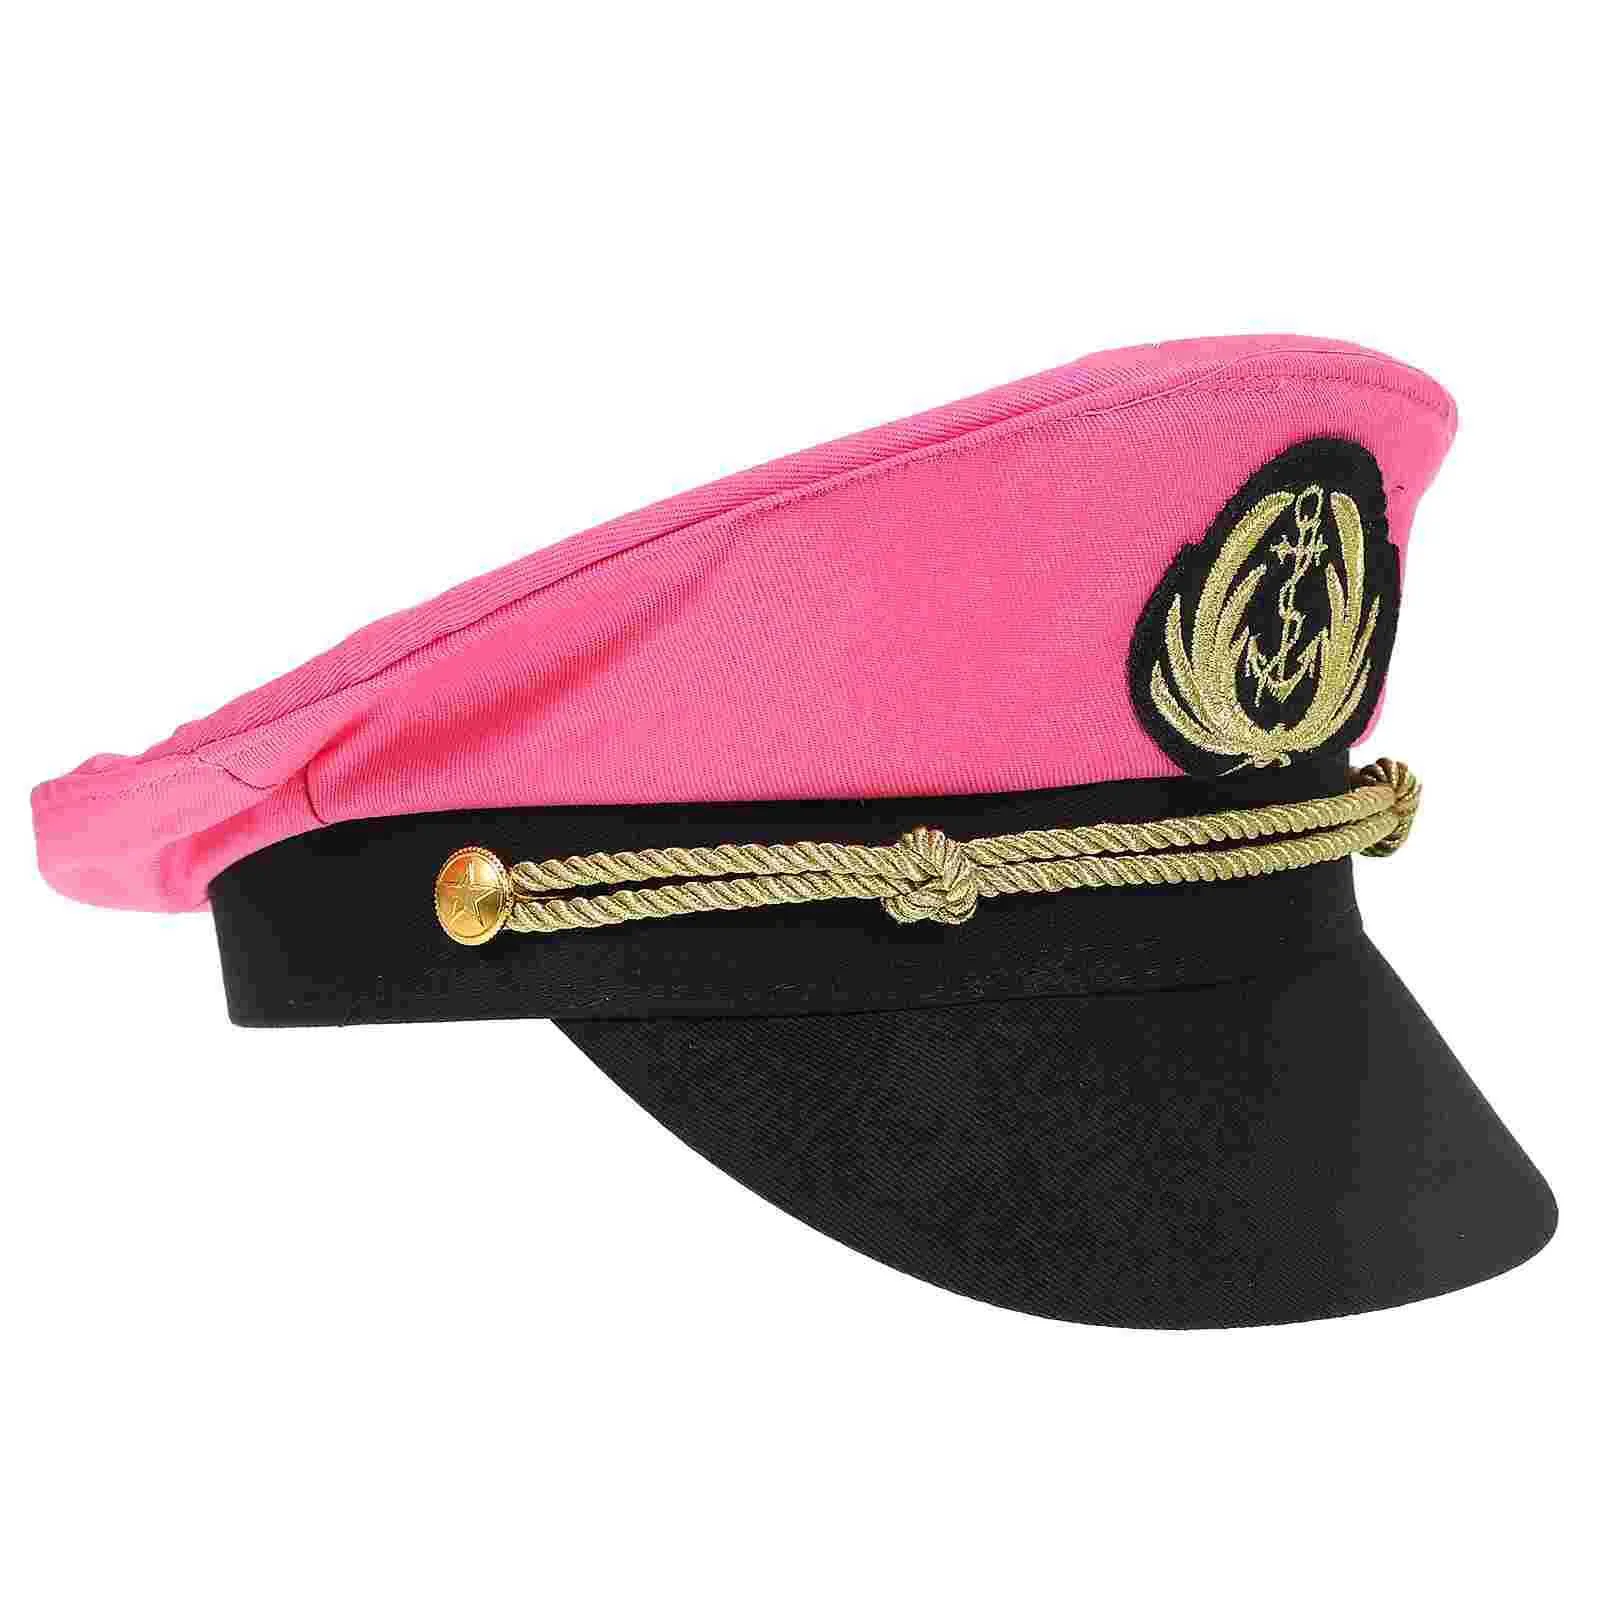 Pink Captain Hen Captain Hat For Women Perfect For Sailing, Halloween, And  Boating Outfits HKD230807 From Mhck, $6.55